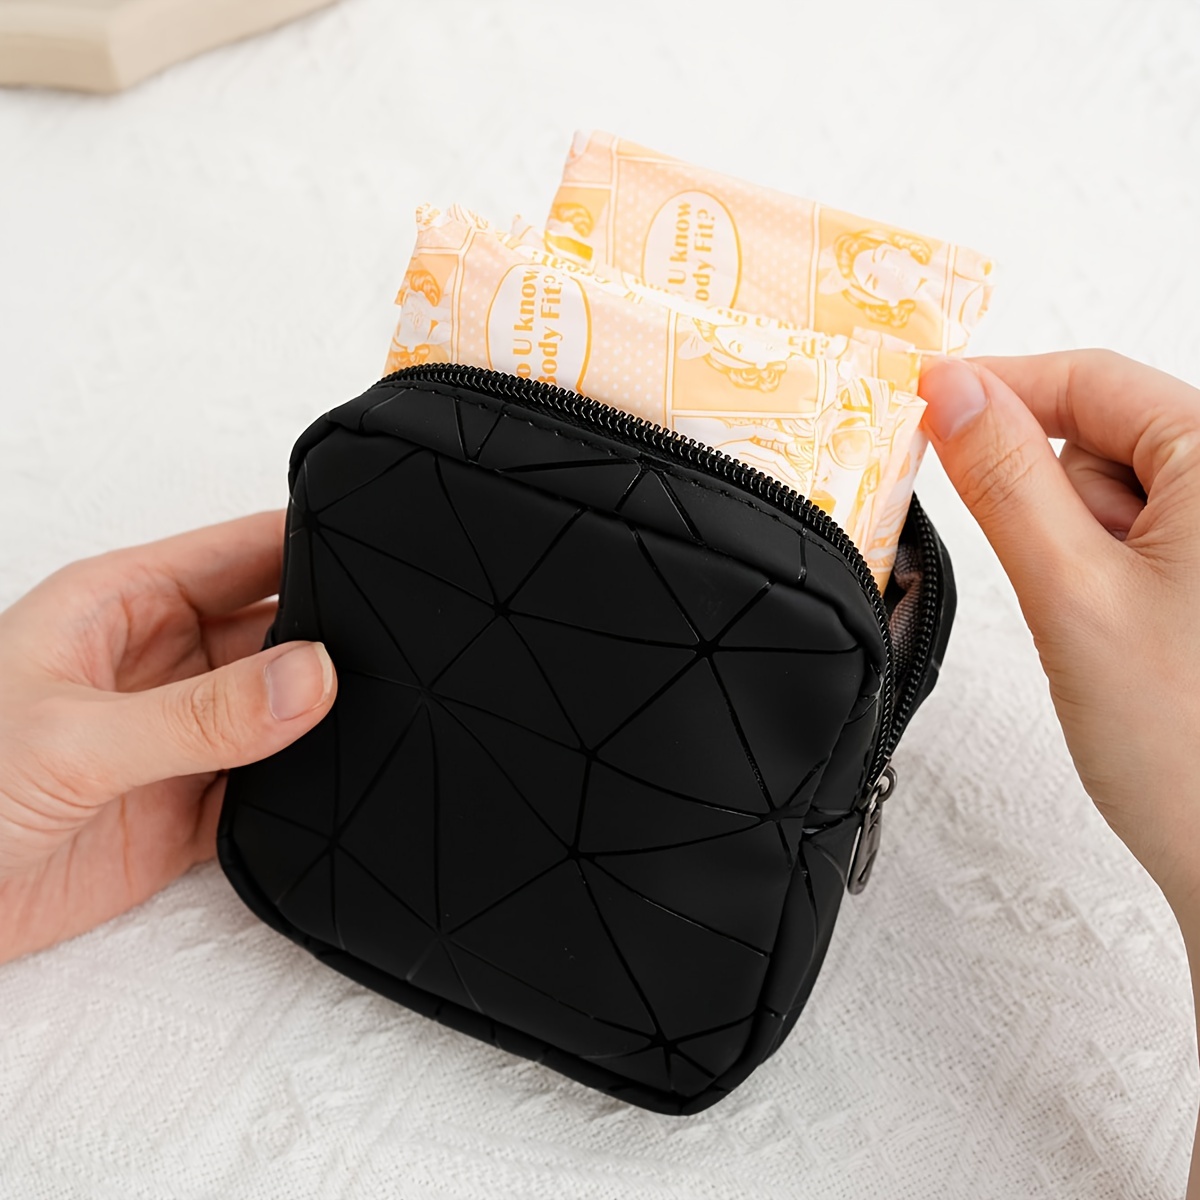 

Sanitary Napkin Storage Bag, Black Makeup Bag For Purse, Cute Cosmetic Zipper Pouch Purse, Travel Coin Pouch Make Up Organizer Pouch For Women